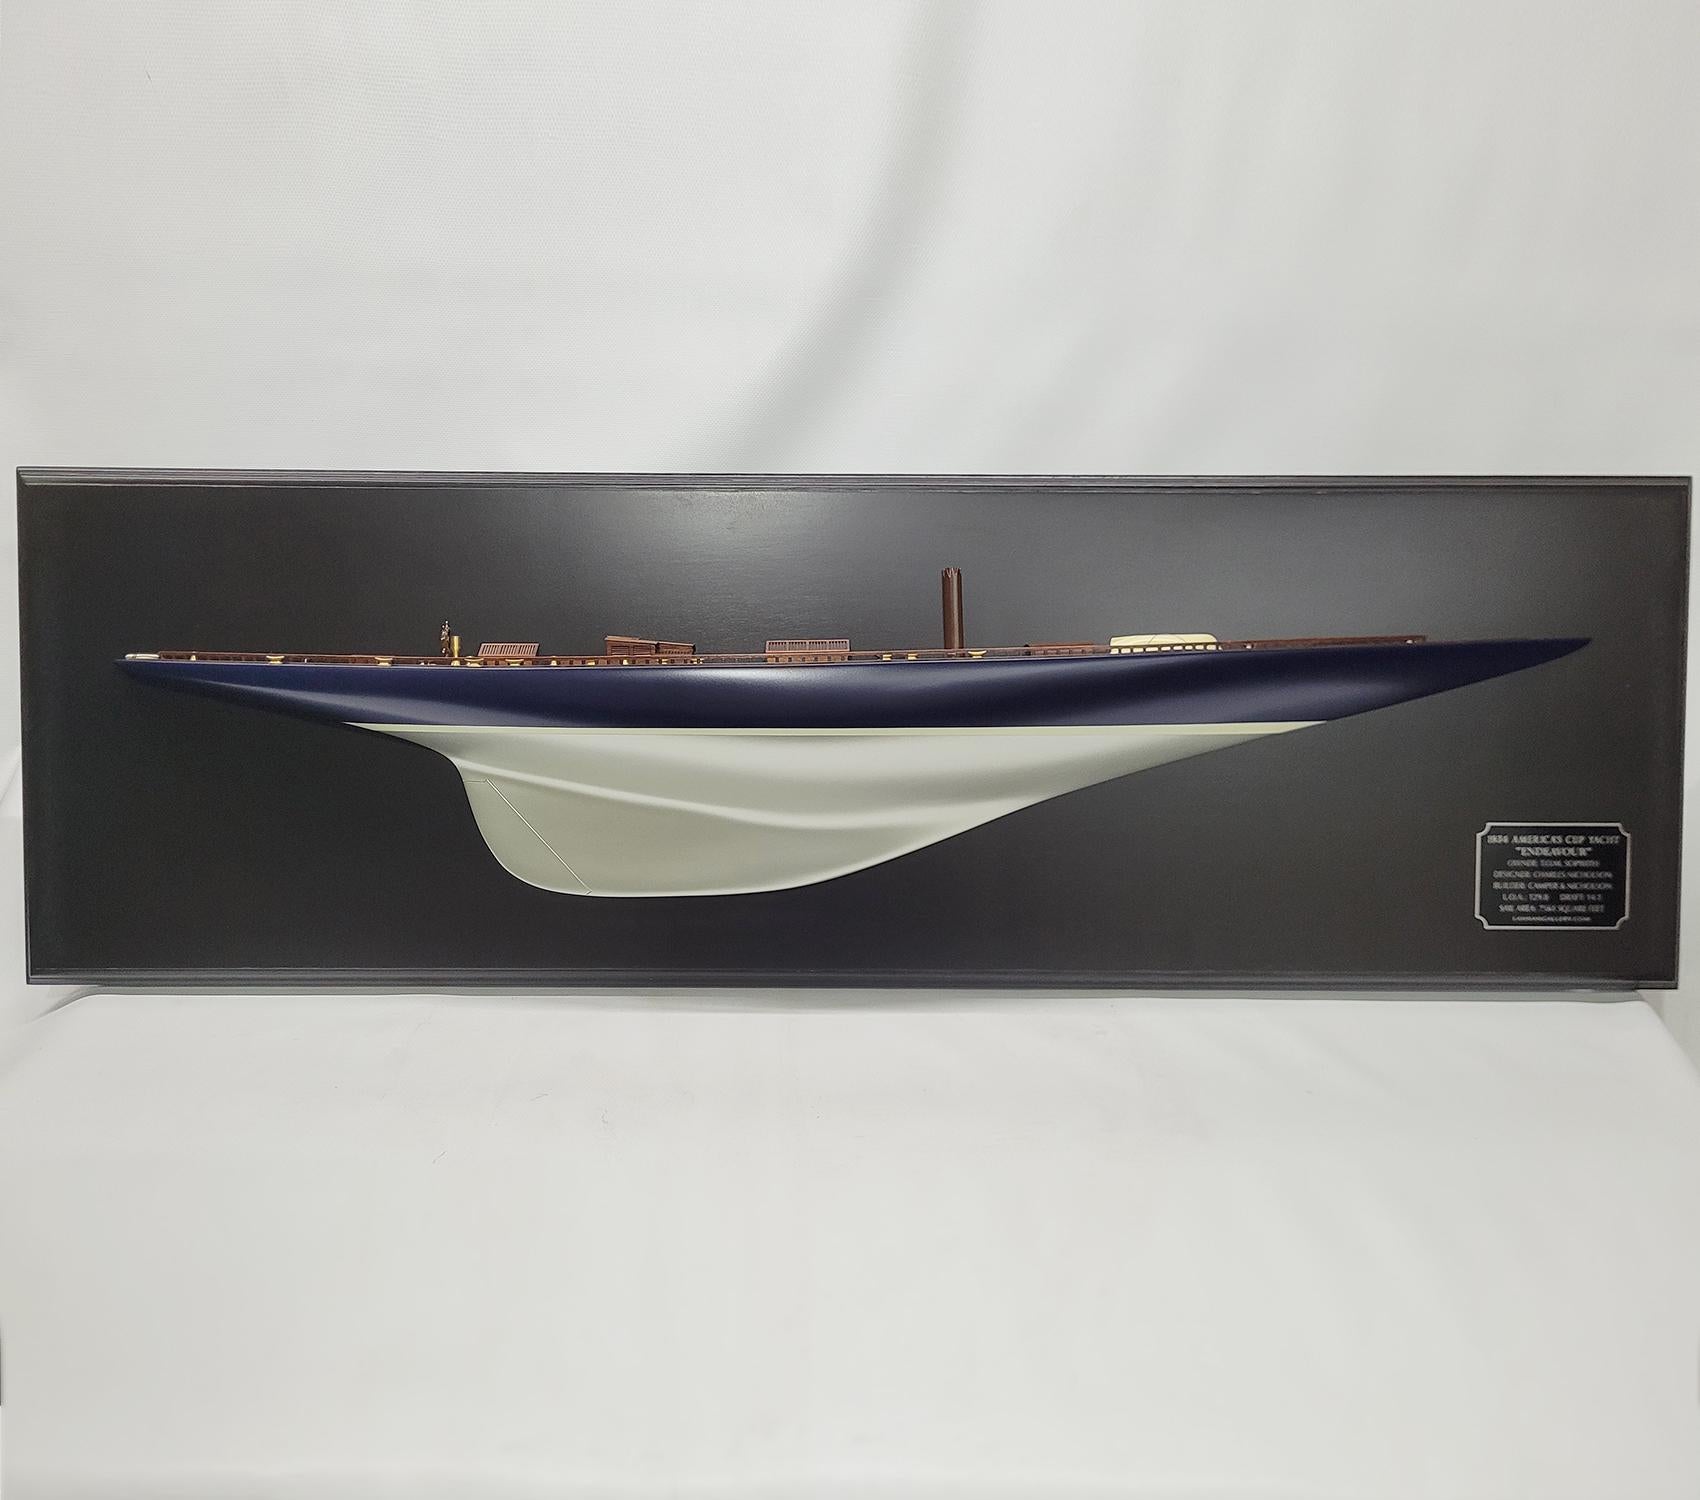 Half model of the America’s cup Yacht Endeavor. This is a 4-foot hull mounted to a blackboard. The Hull is painted blue over silver. The planked deck has skylights, Companionway, Spinnaker pole, Lifeboat, Cleats, Toe rail, Etc. Mounted to a